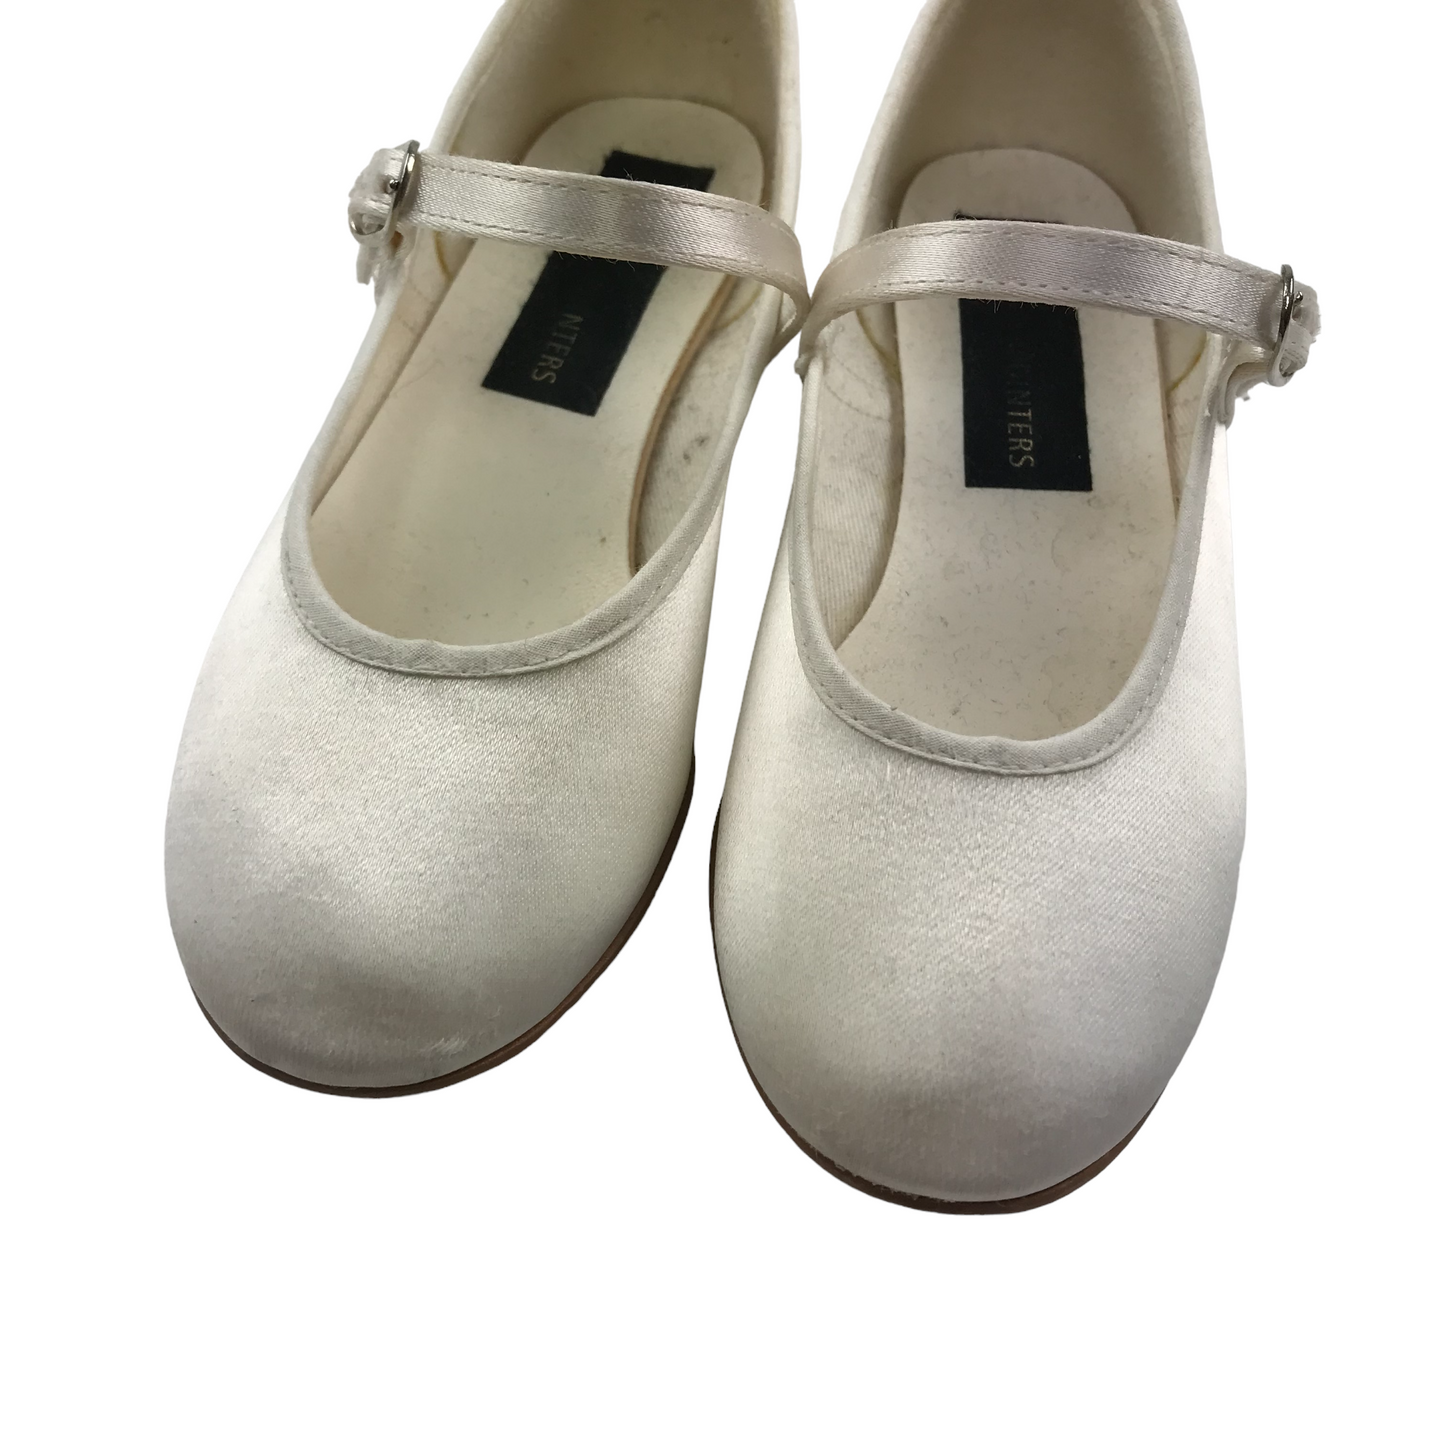 White Ballet Style Pumps with Small Heels Shoe Size 12 junior